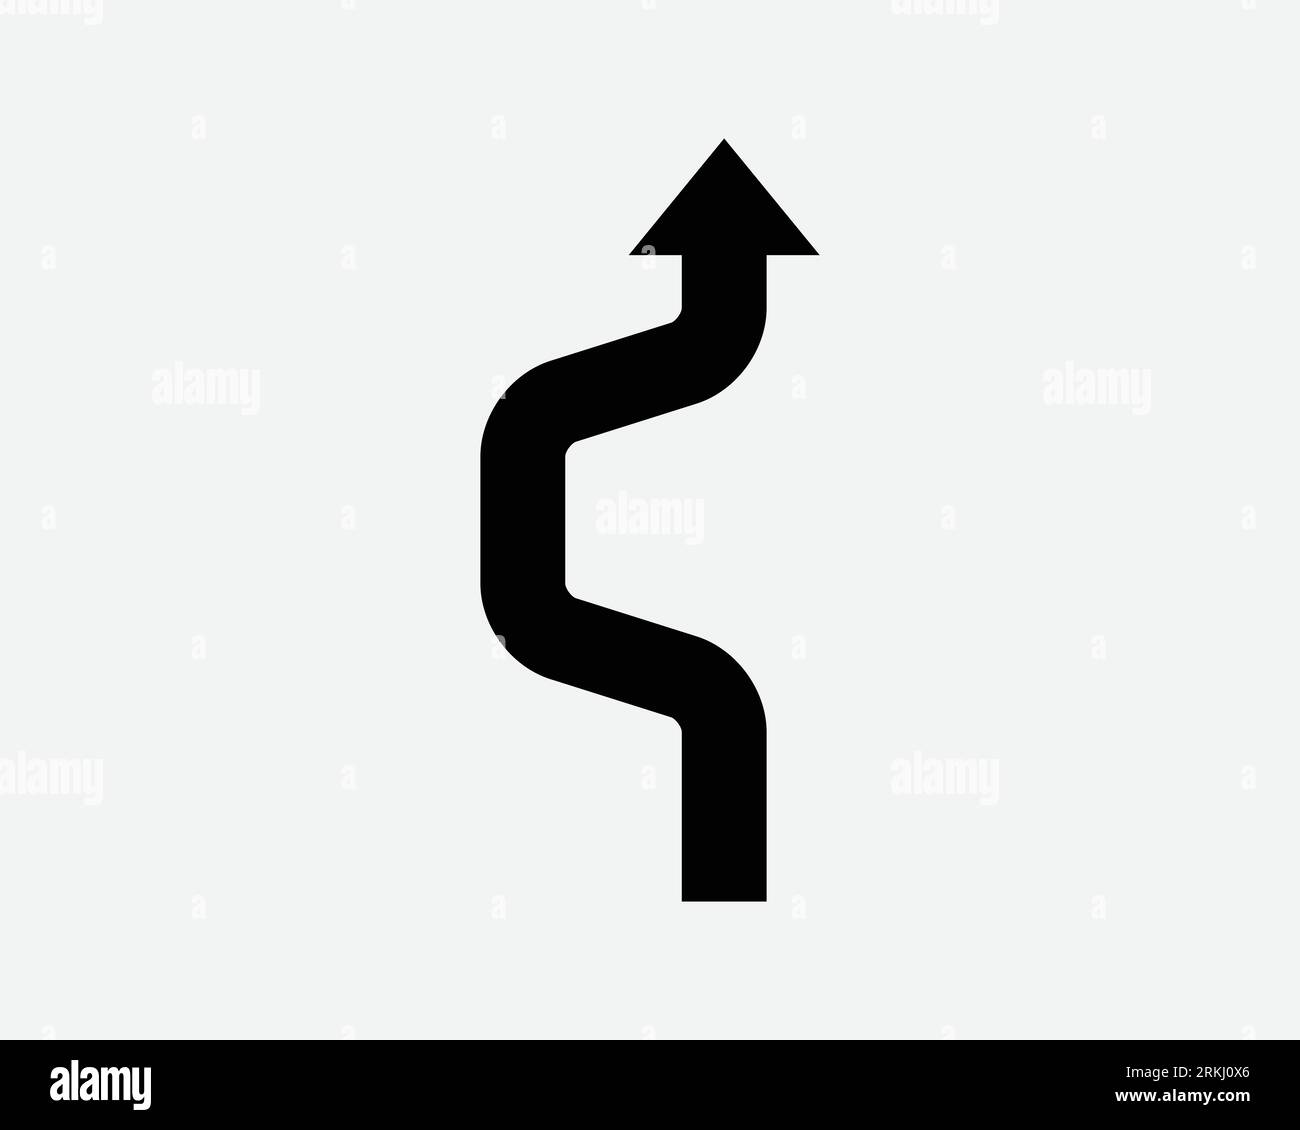 Winding Path Arrow Up Road Curve Traffic Bend Caution Warning Icon Black White Outline Shape Vector Clipart Graphic Illustration Artwork Sign Symbol Stock Vector